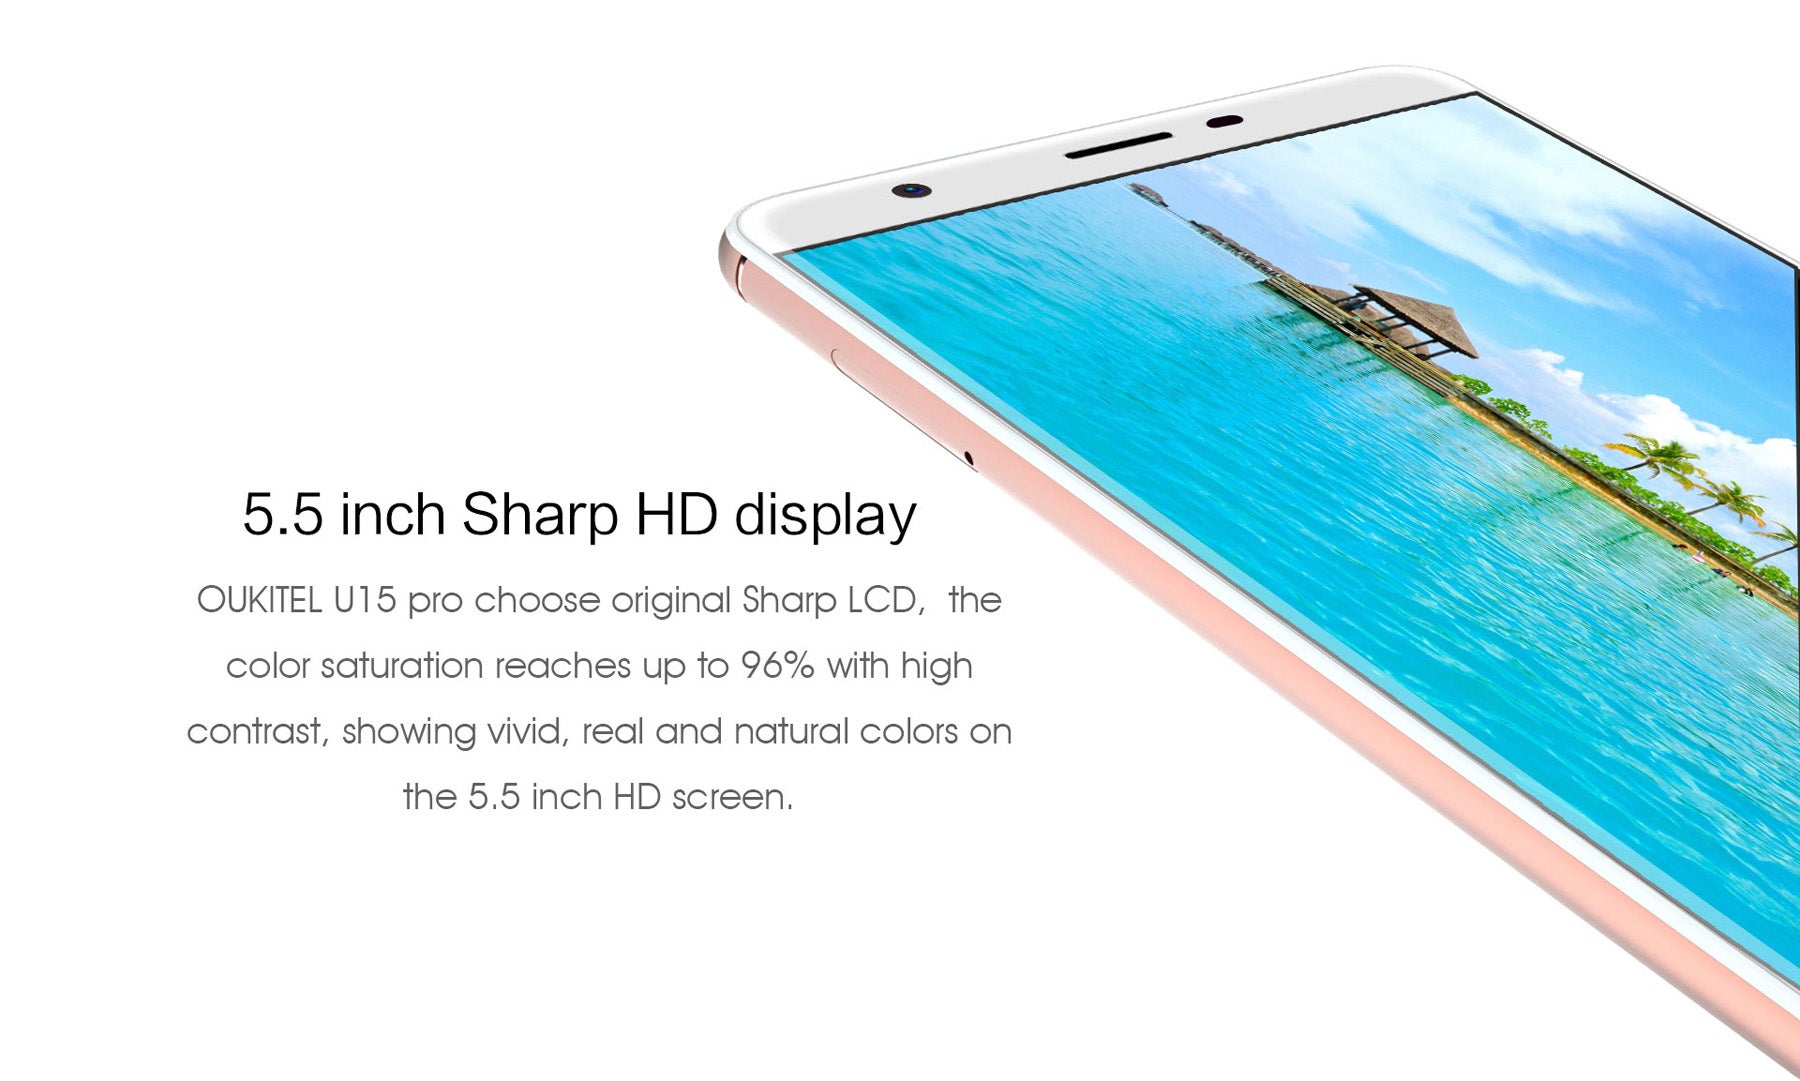 The Oukitel U15 Pro features a 5.5-inch display made by Sharp - The Oukitel U15 Pro is one of the cheapest octa-core smartphones you can find